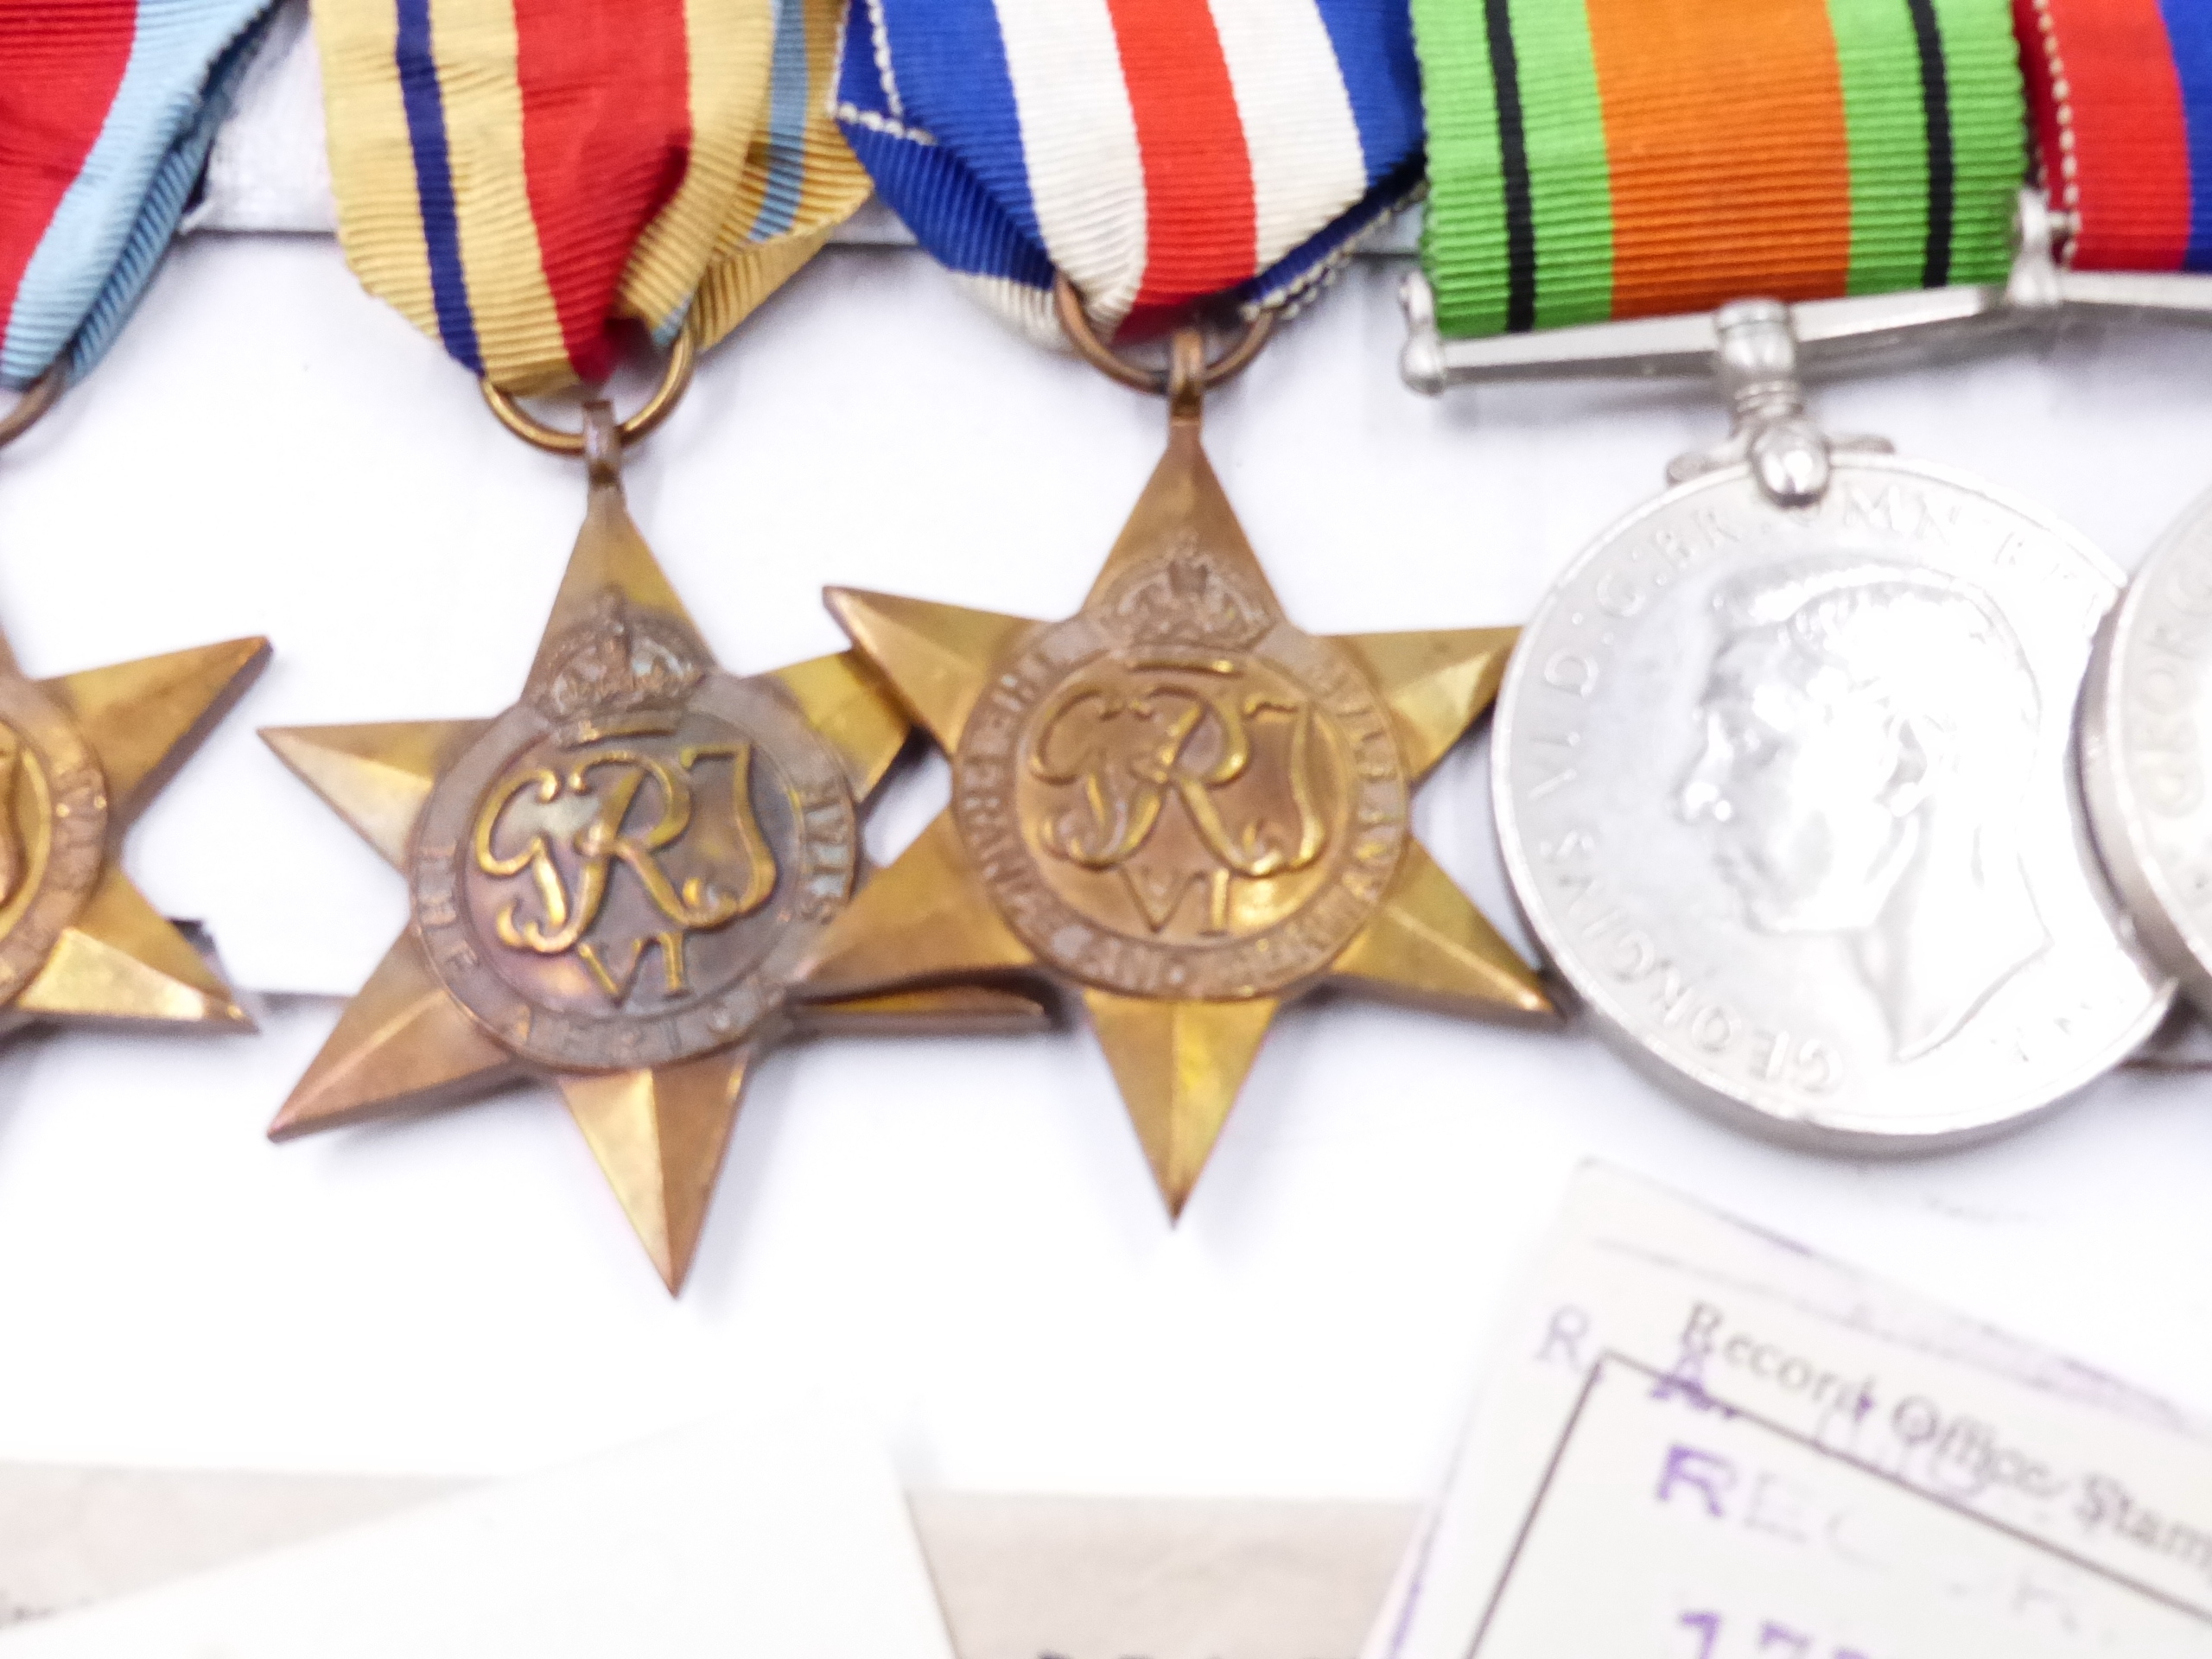 A GROUP OF FIVE WWII MEDALS AND RELATED EPHEMERA TO 1609117 FRED ALCOCK. - Image 7 of 12